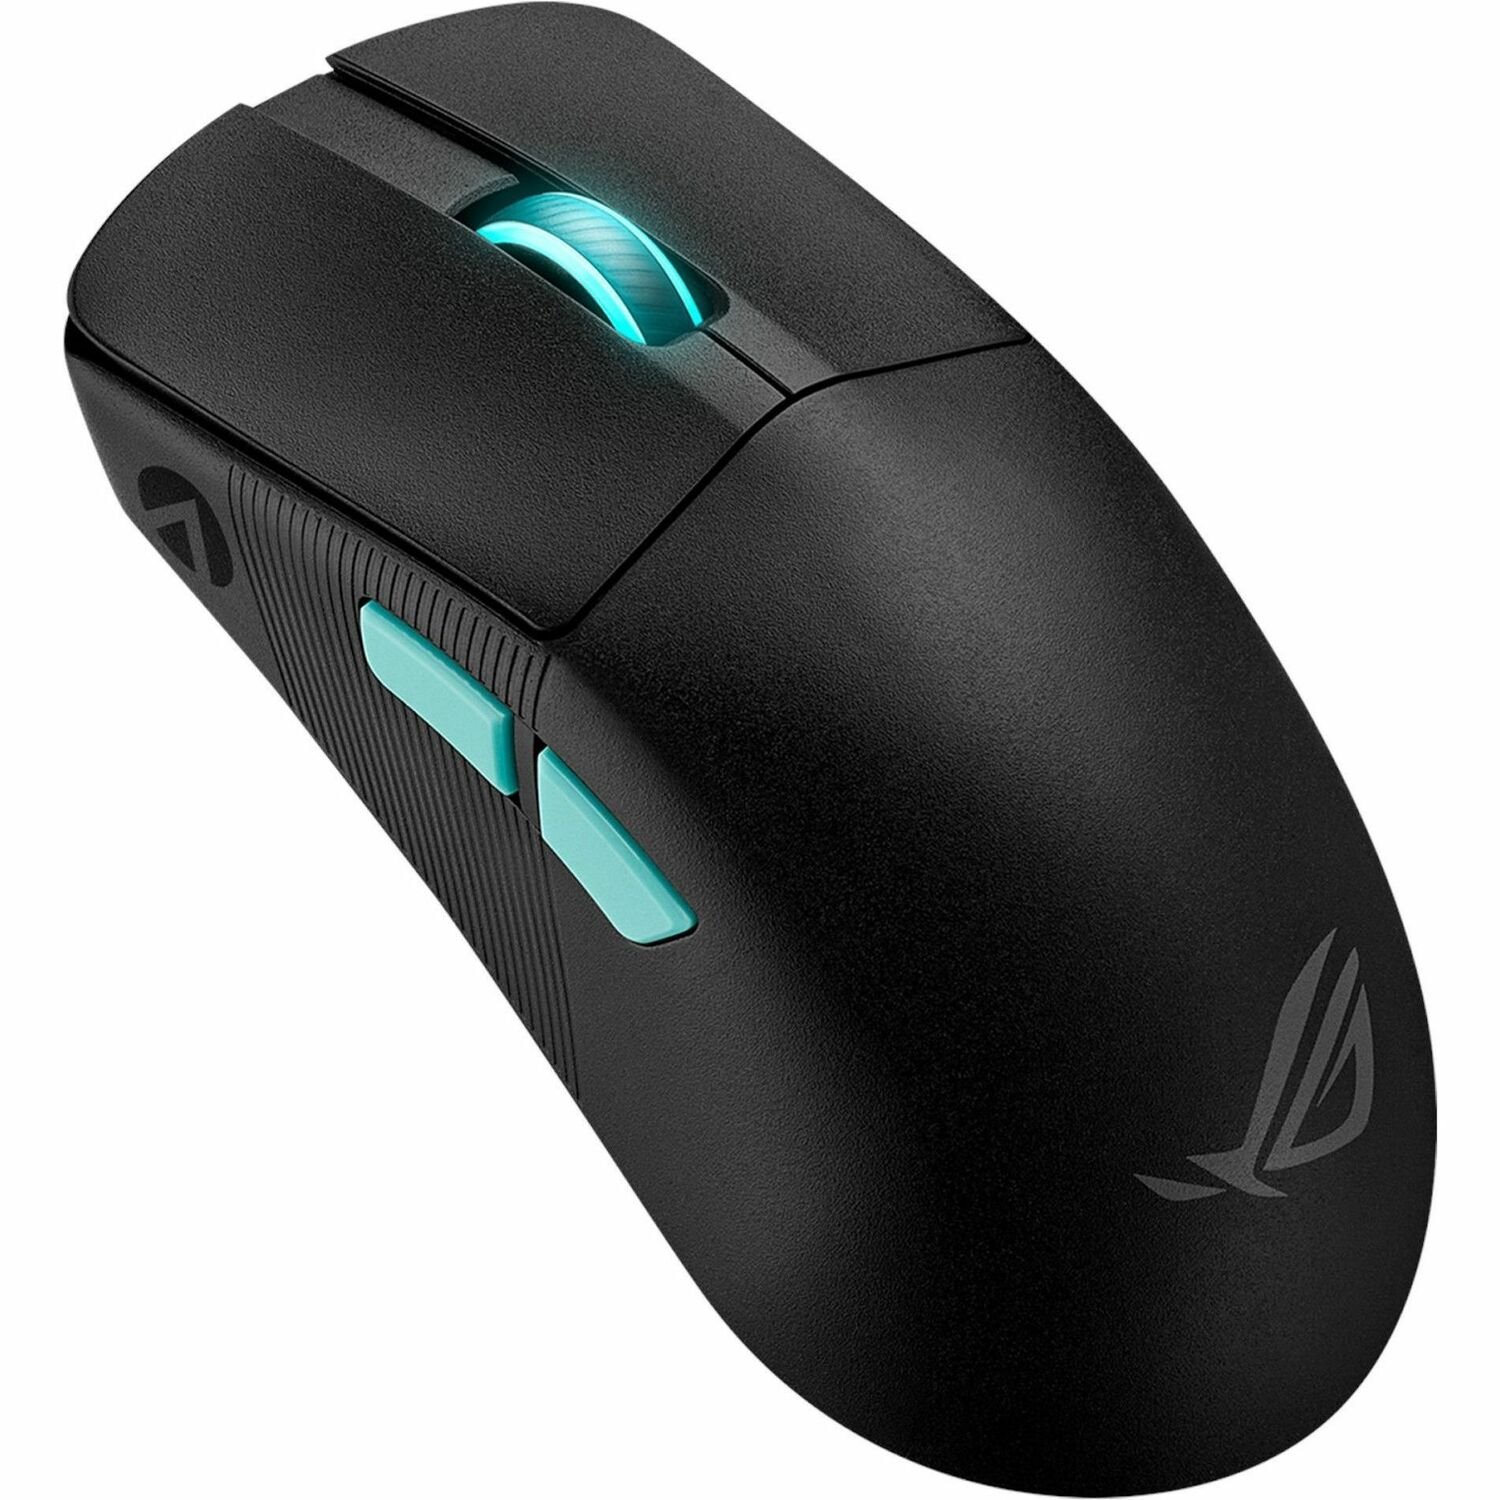 Asus ROG Harpe Ace Aim Lab Edition Gaming Mouse - Bluetooth/Radio Frequency - USB 2.0 - Optical - 5 Button(s) - Black - 1